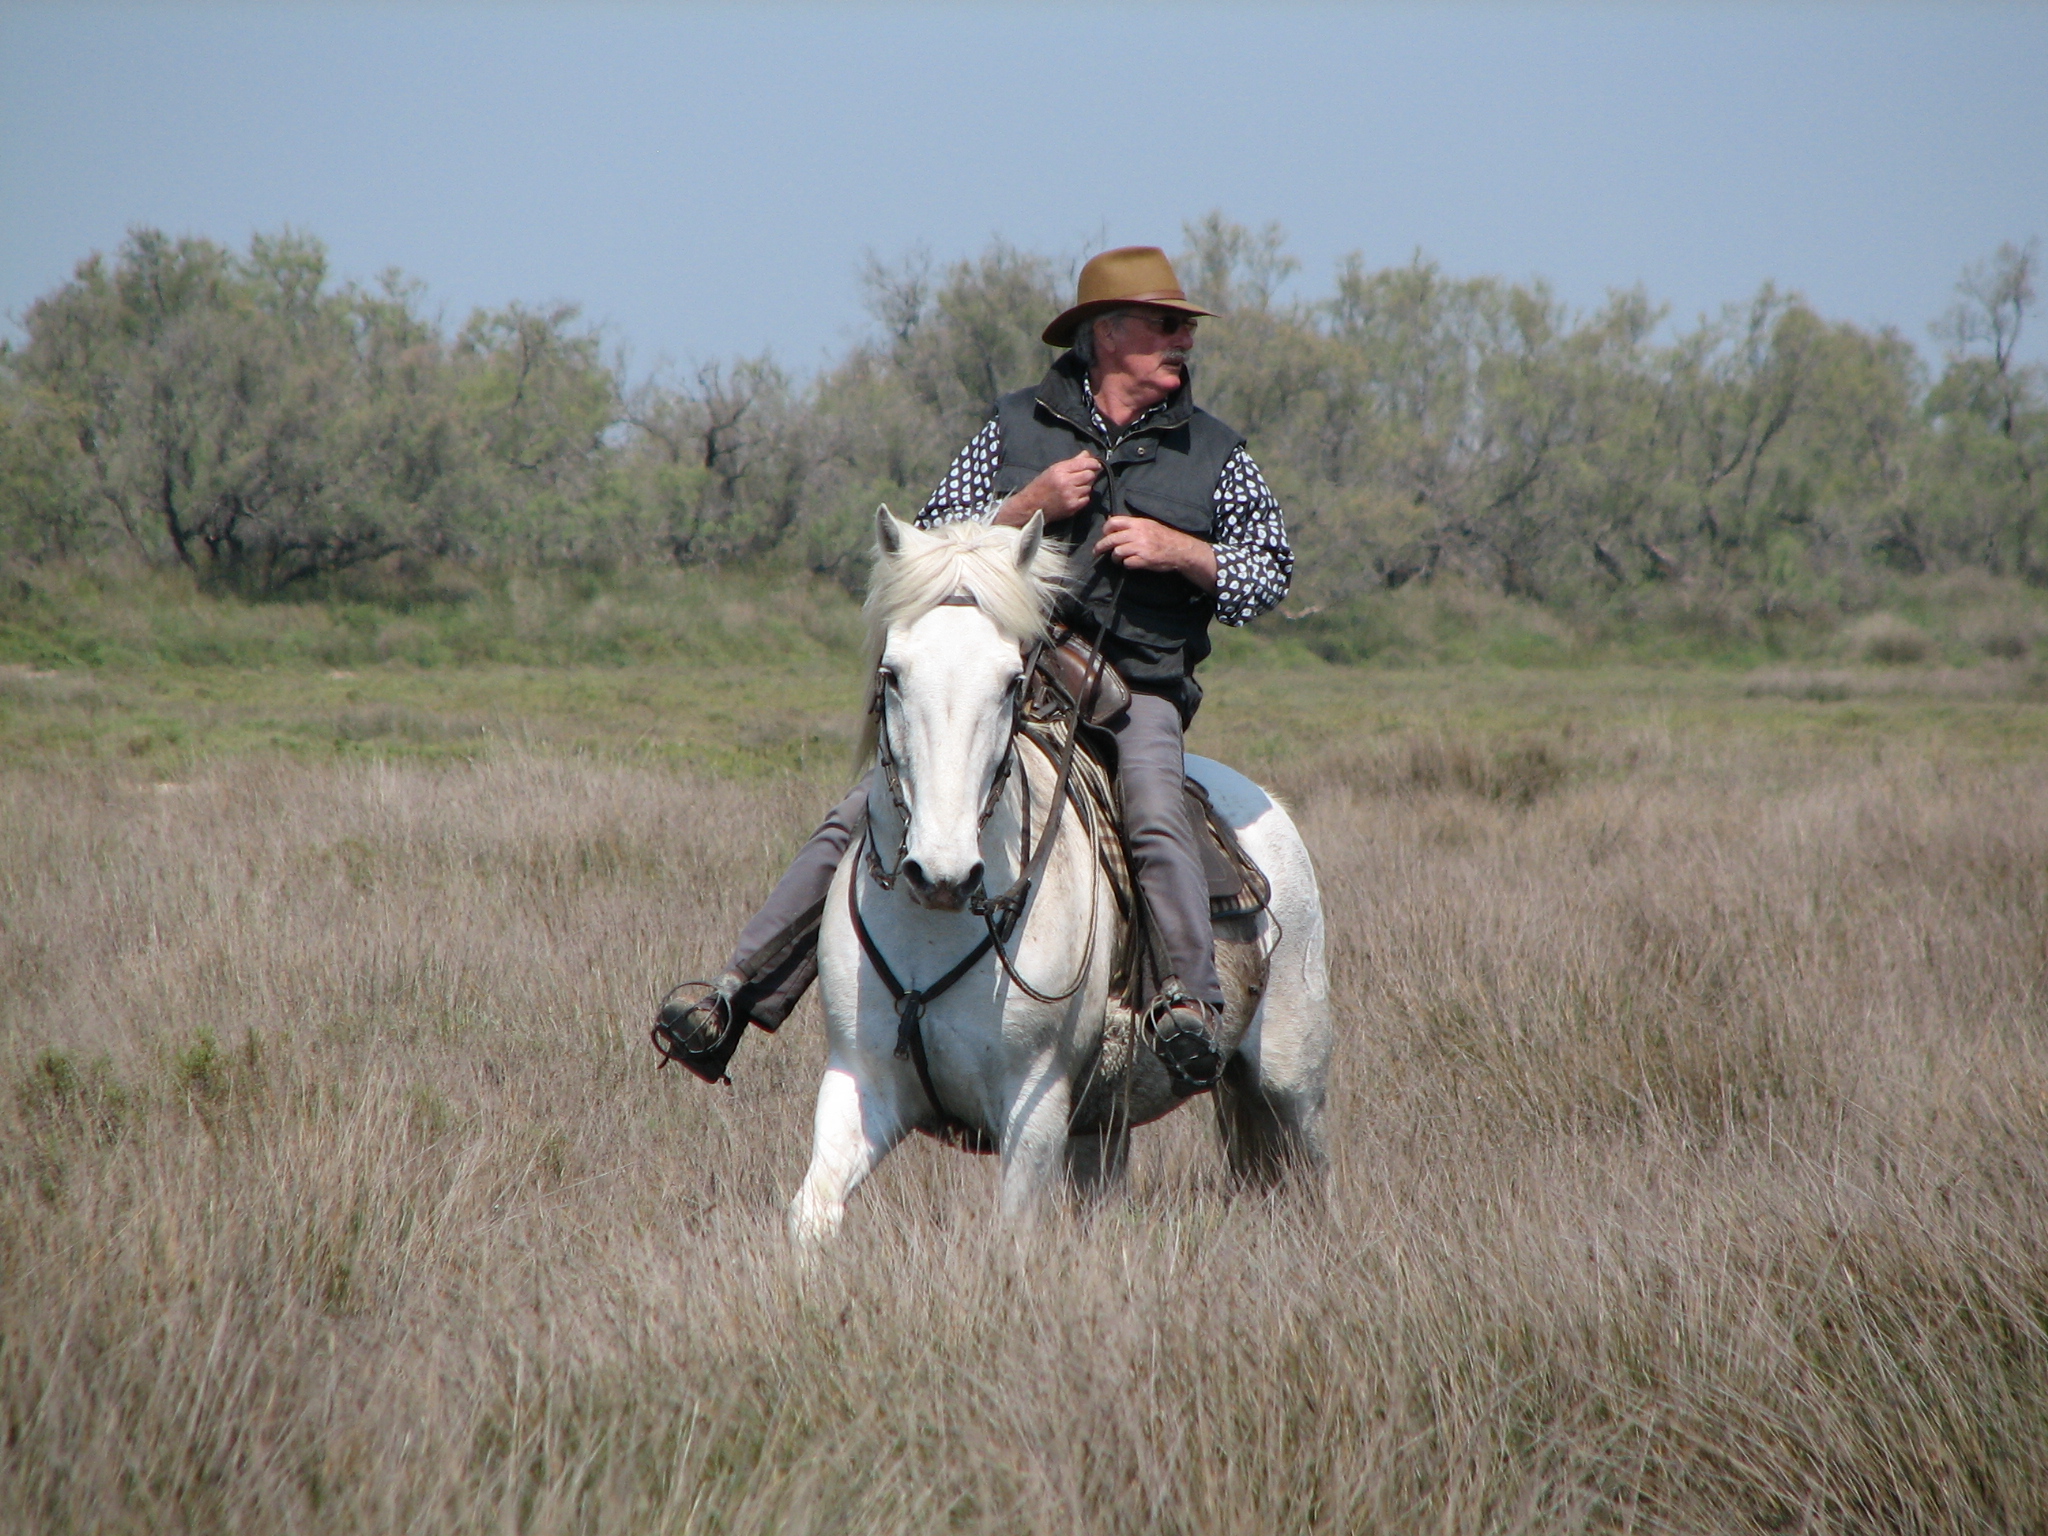 Herding with a Camargue horse